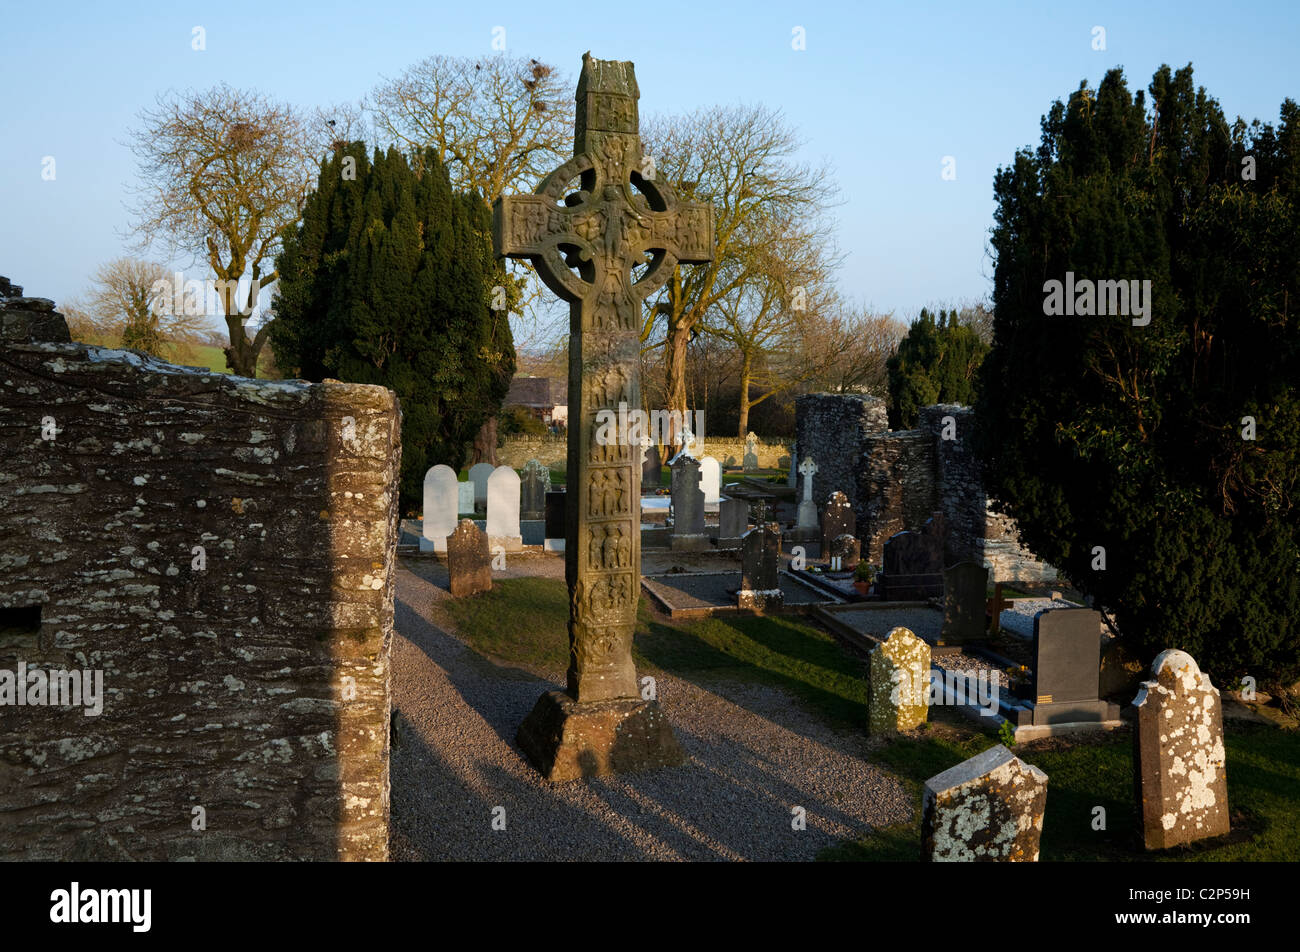 High Cross at the Monastic Site at Monasterboice, County Louth, Ireland Stock Photo